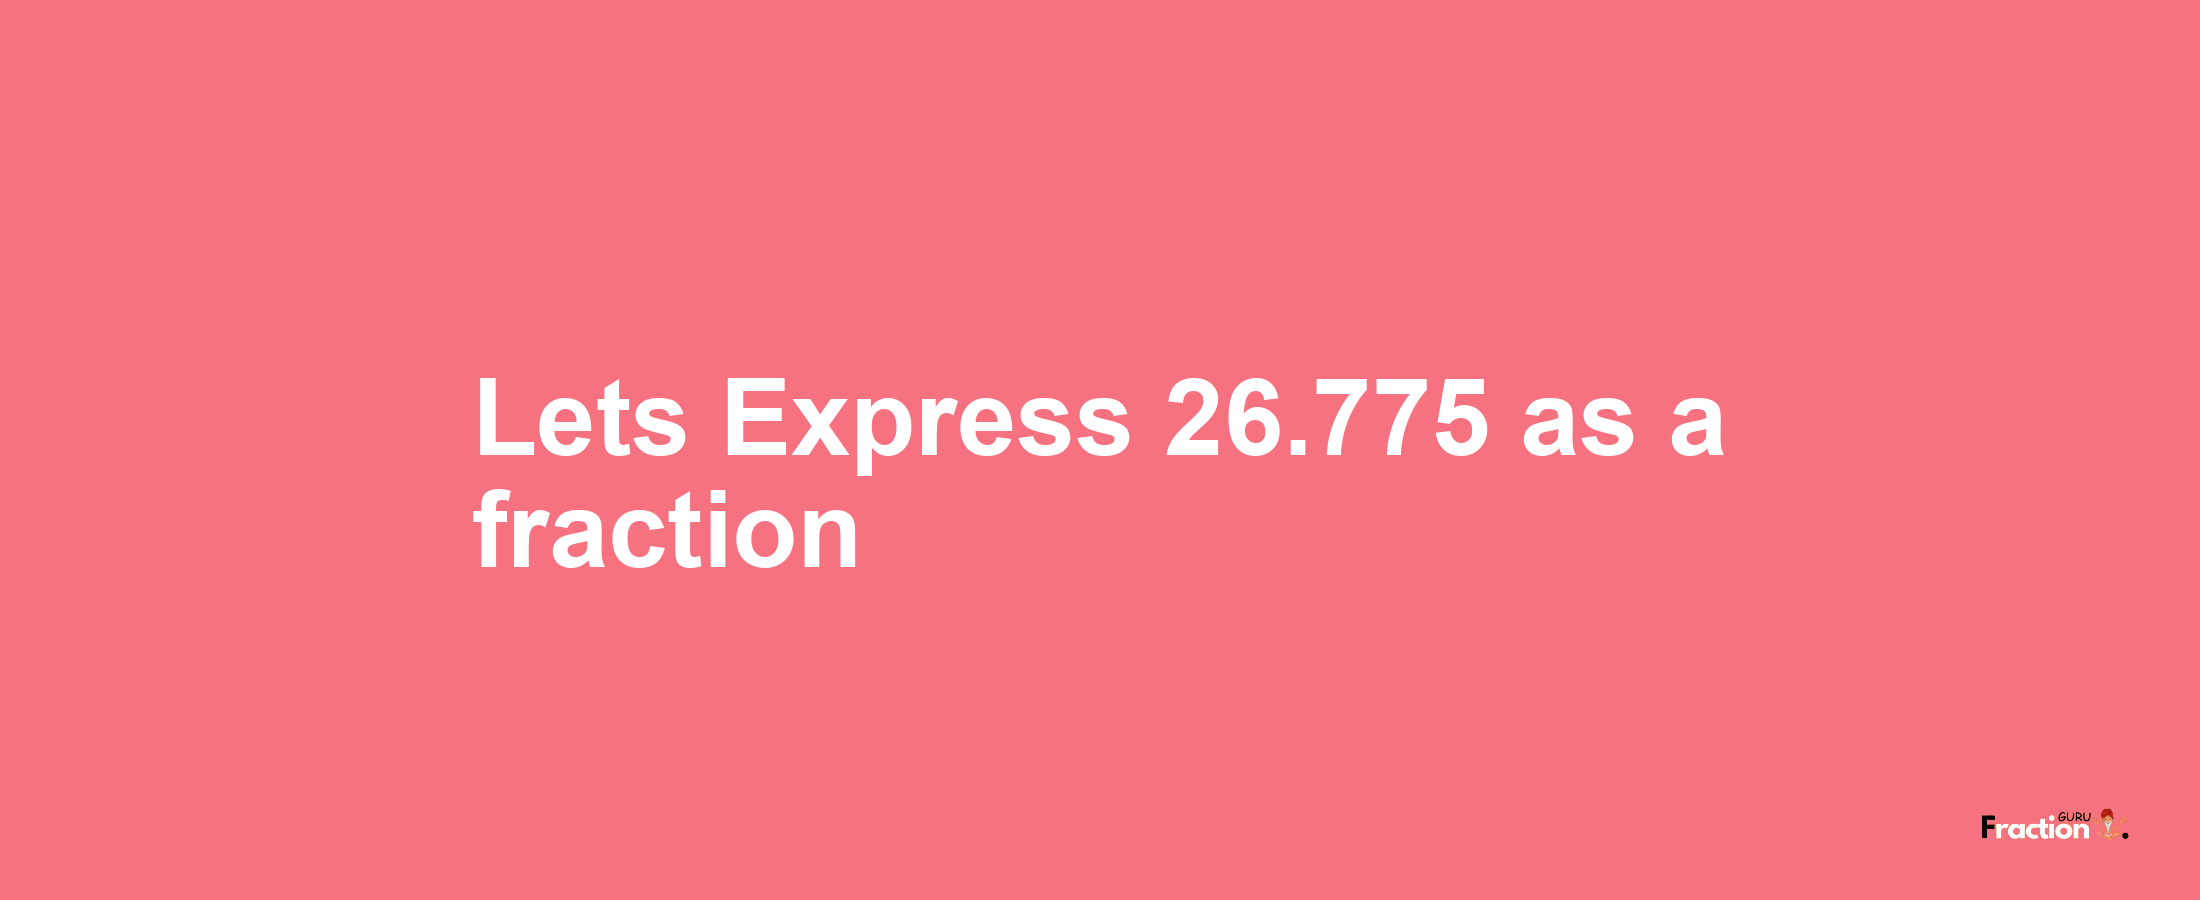 Lets Express 26.775 as afraction